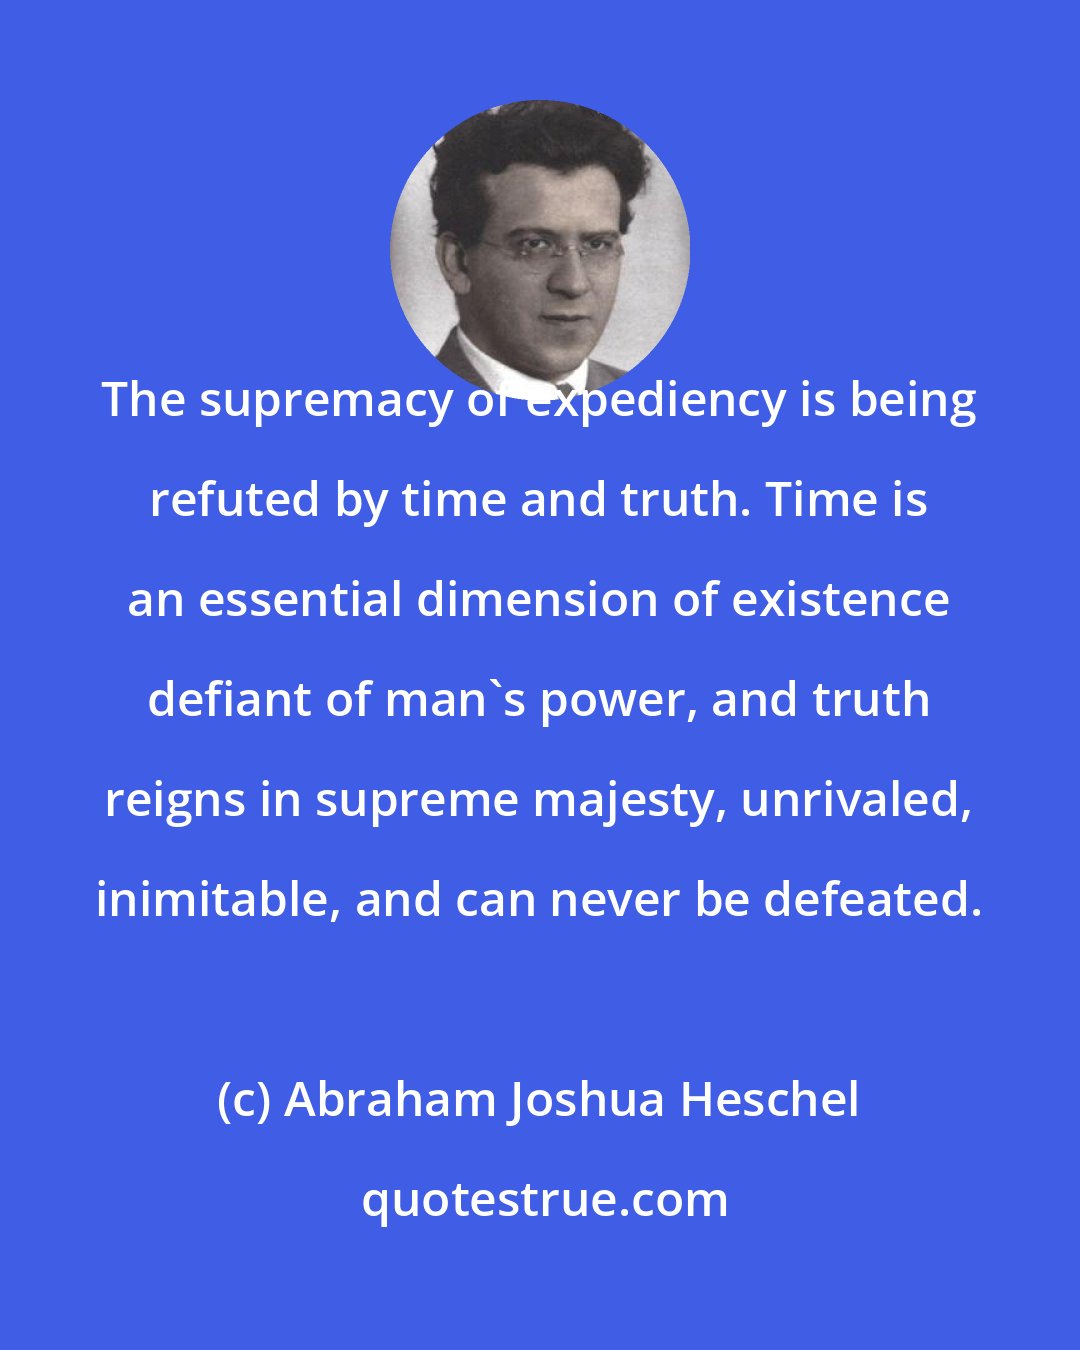 Abraham Joshua Heschel: The supremacy of expediency is being refuted by time and truth. Time is an essential dimension of existence defiant of man's power, and truth reigns in supreme majesty, unrivaled, inimitable, and can never be defeated.